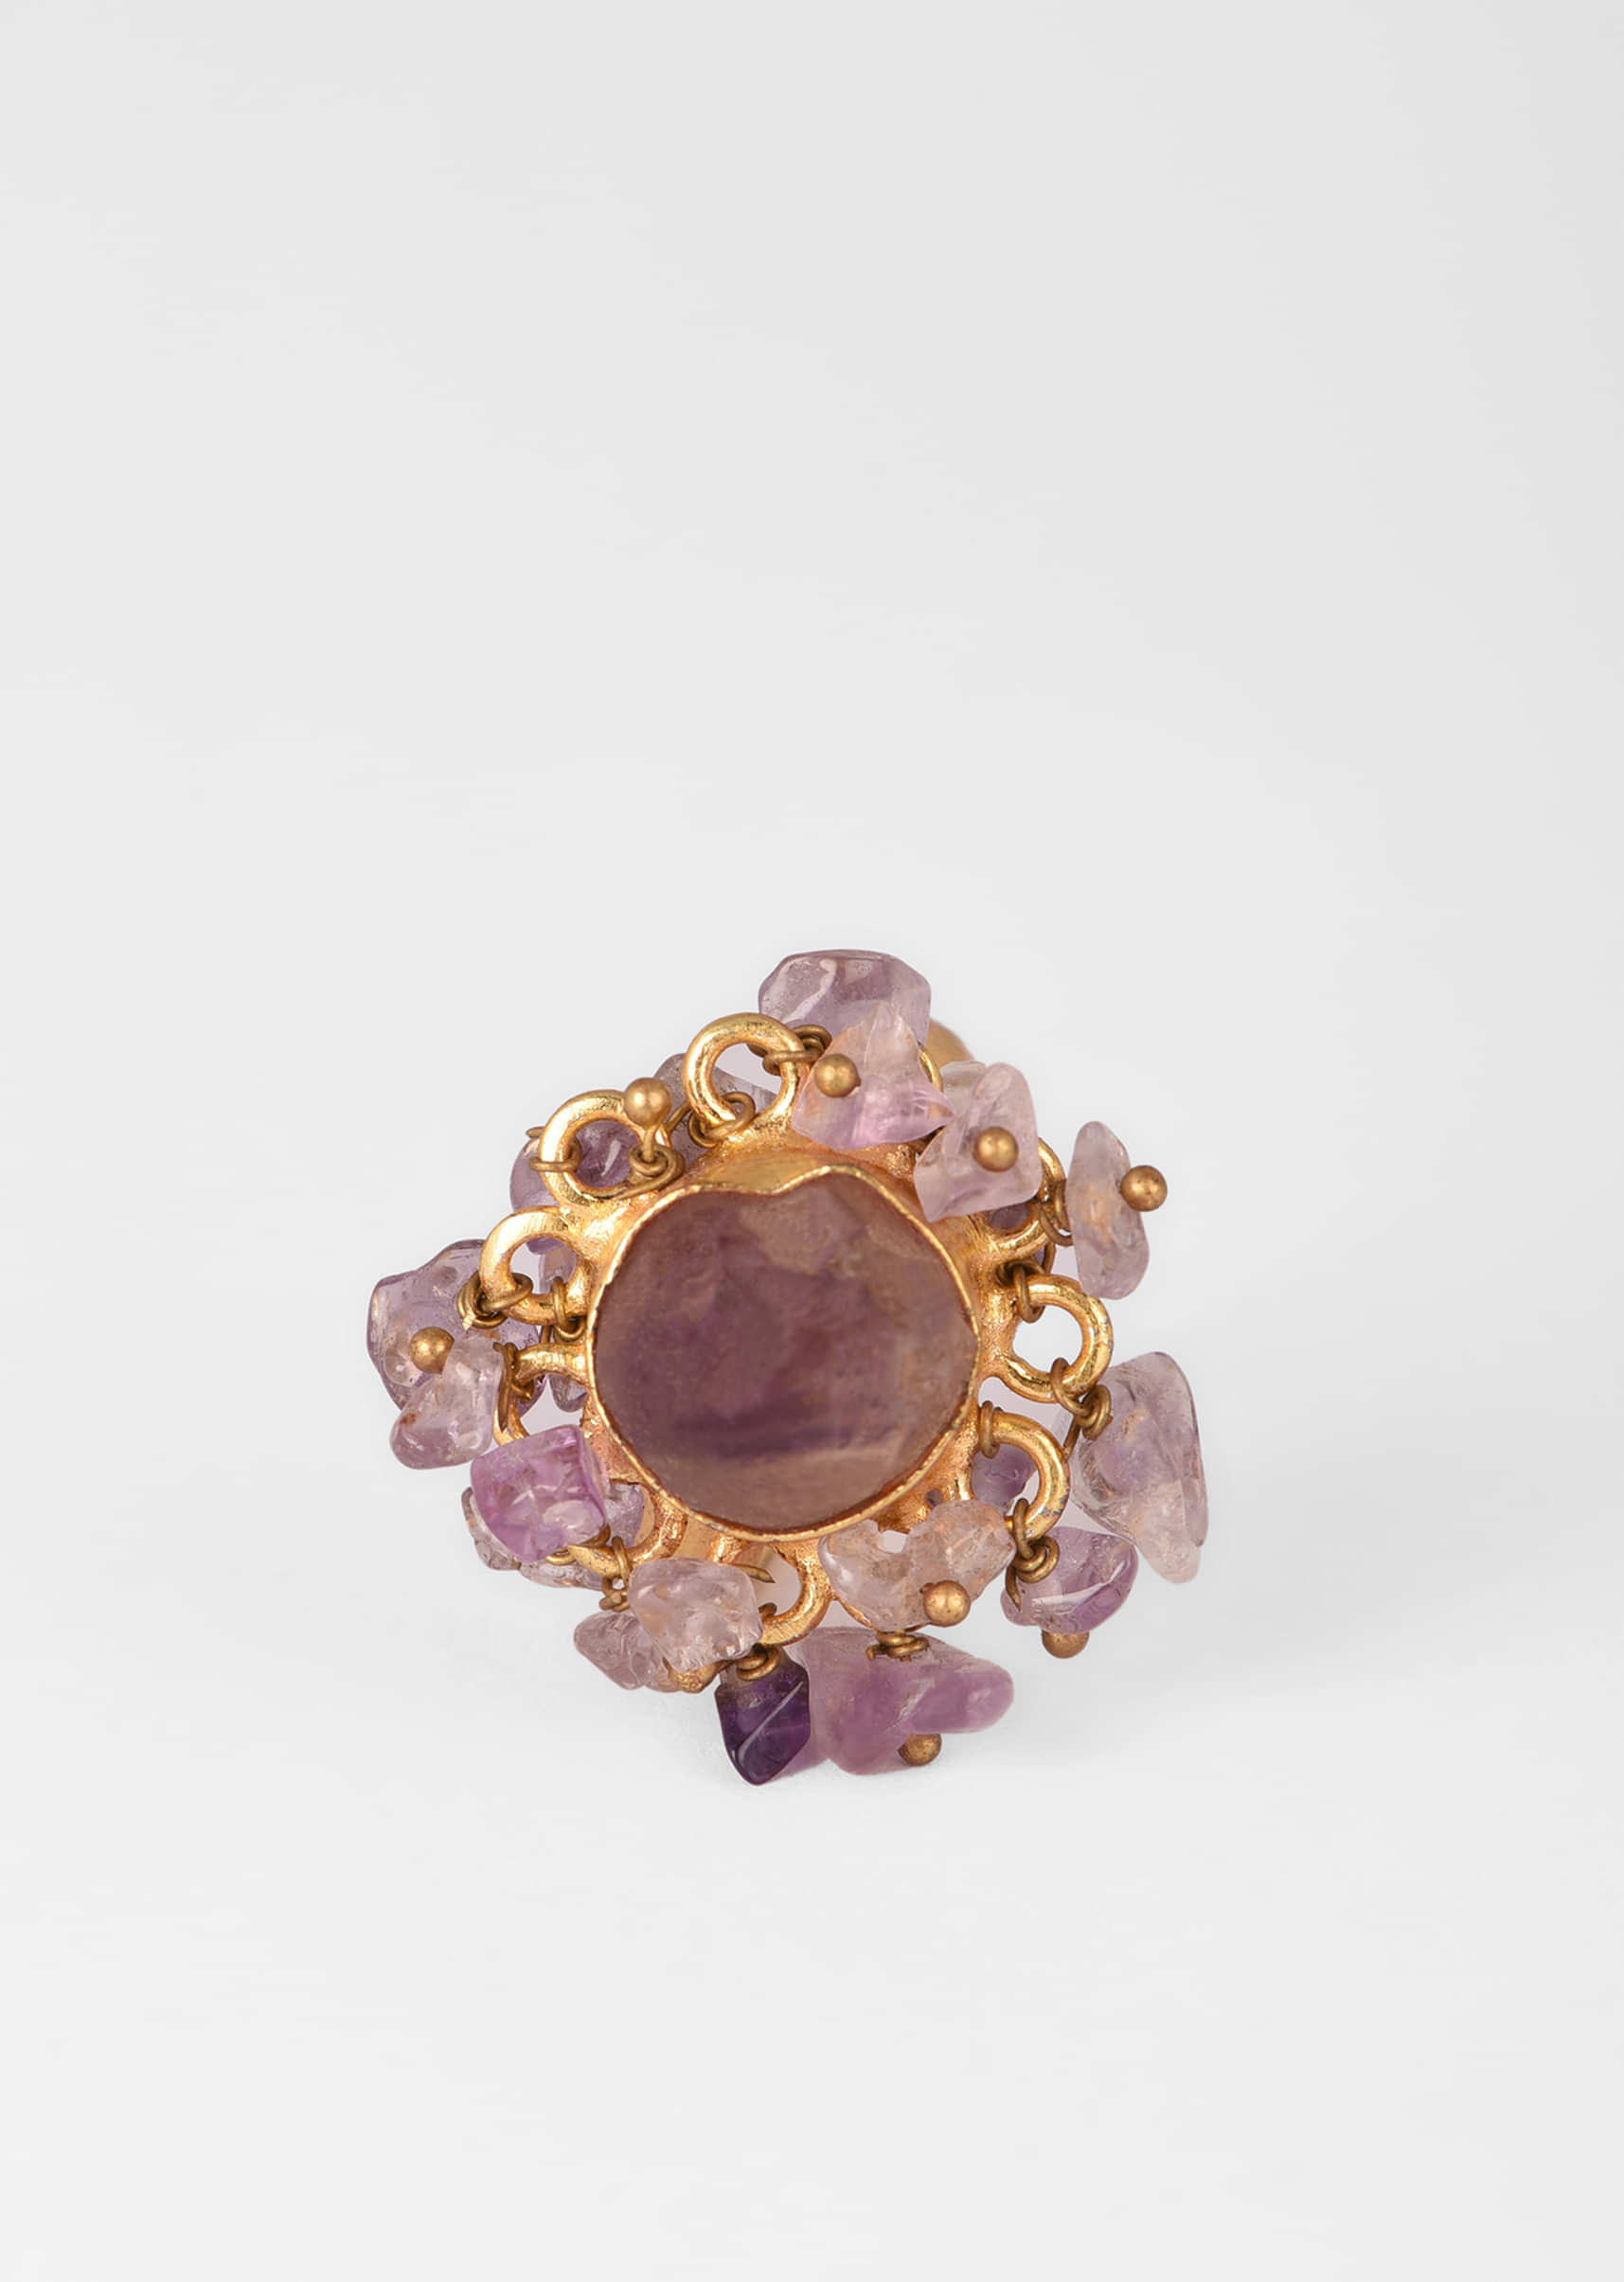 Gold Plated Ring With A Pale Purple Semi Precious Stone Centre And Tiny Stone Pieces All Over 